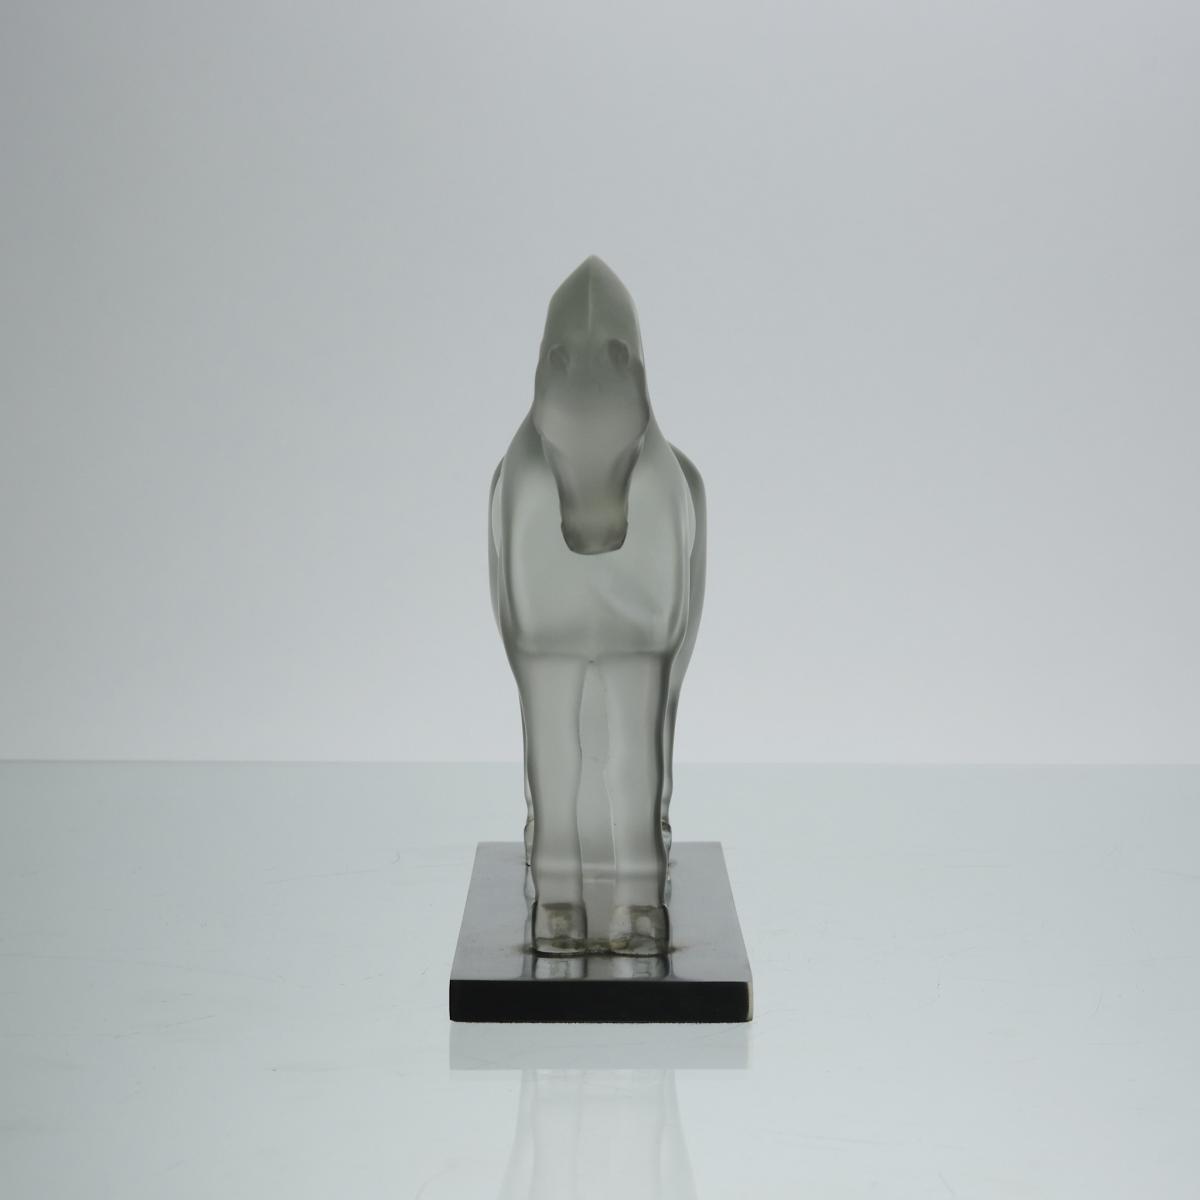 20th Century Frosted Glass Sculpture entitled "Cheval Debout" by Marc Lalique